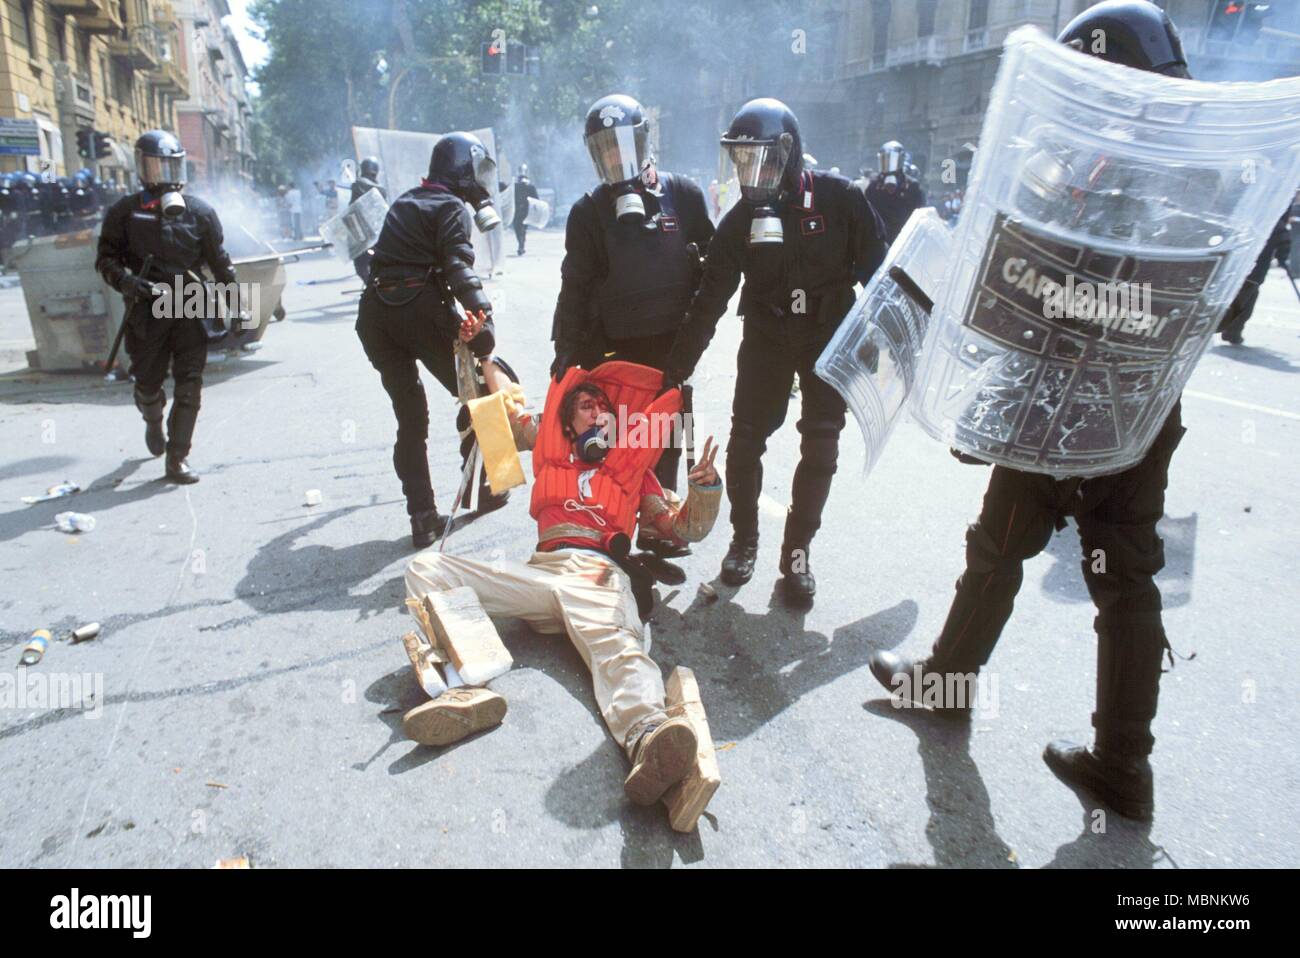 protest against the international G8 summit in Genoa (Italy), July 2001 Stock Photo